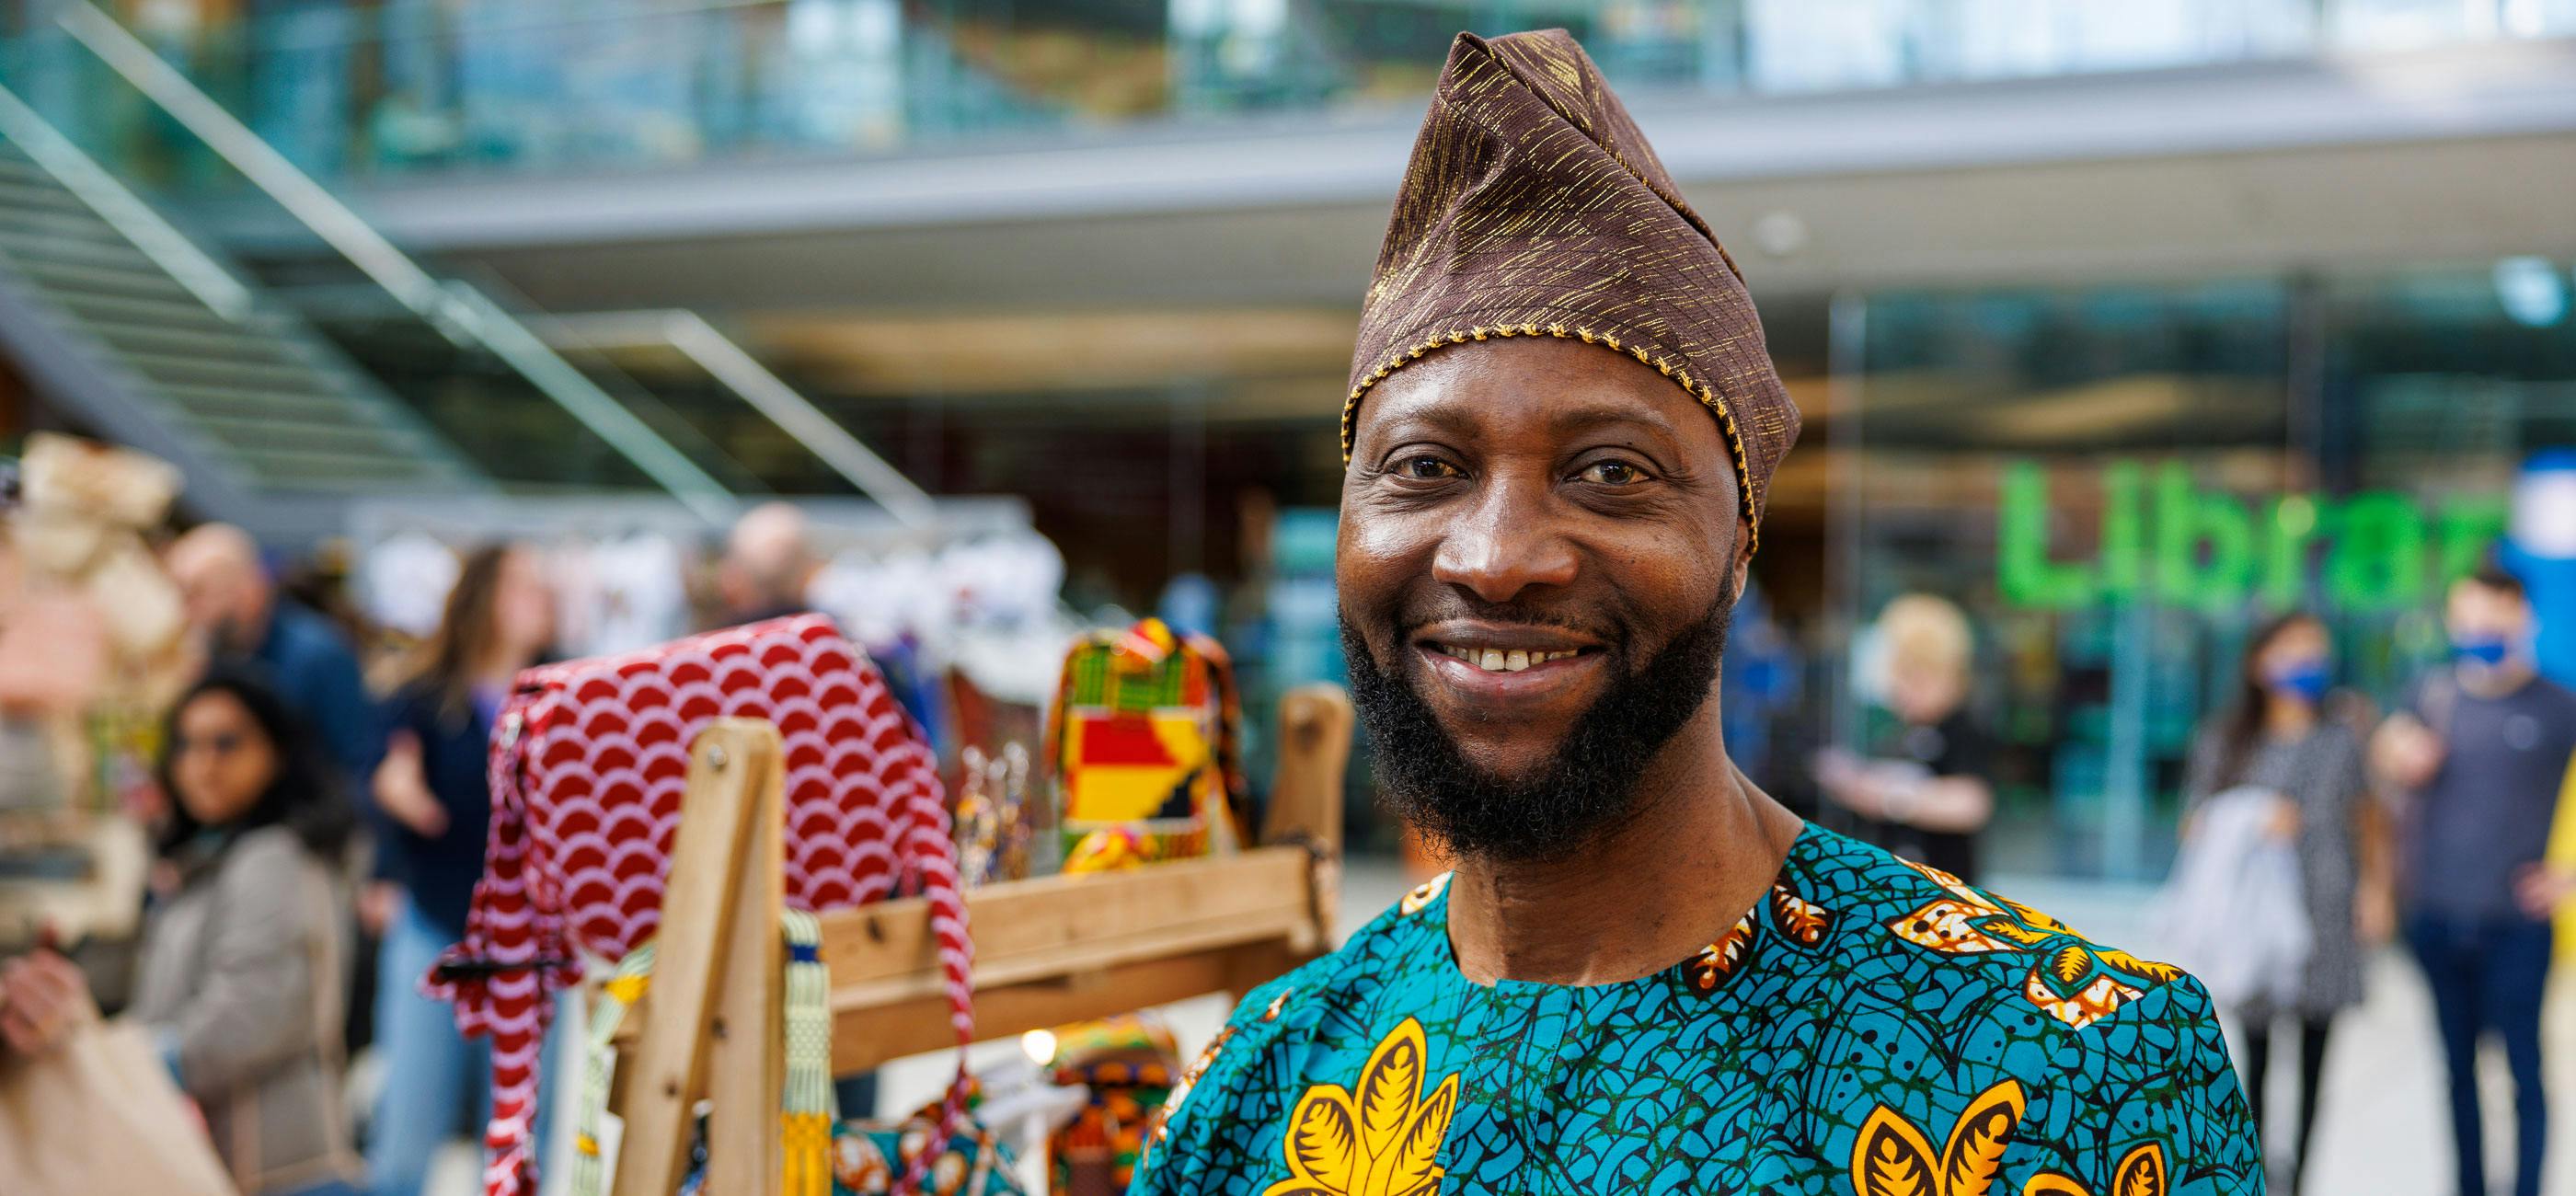 A smiling market stand trader stands inside The Forum dressed and selling accessories in vibrant African fabrics.